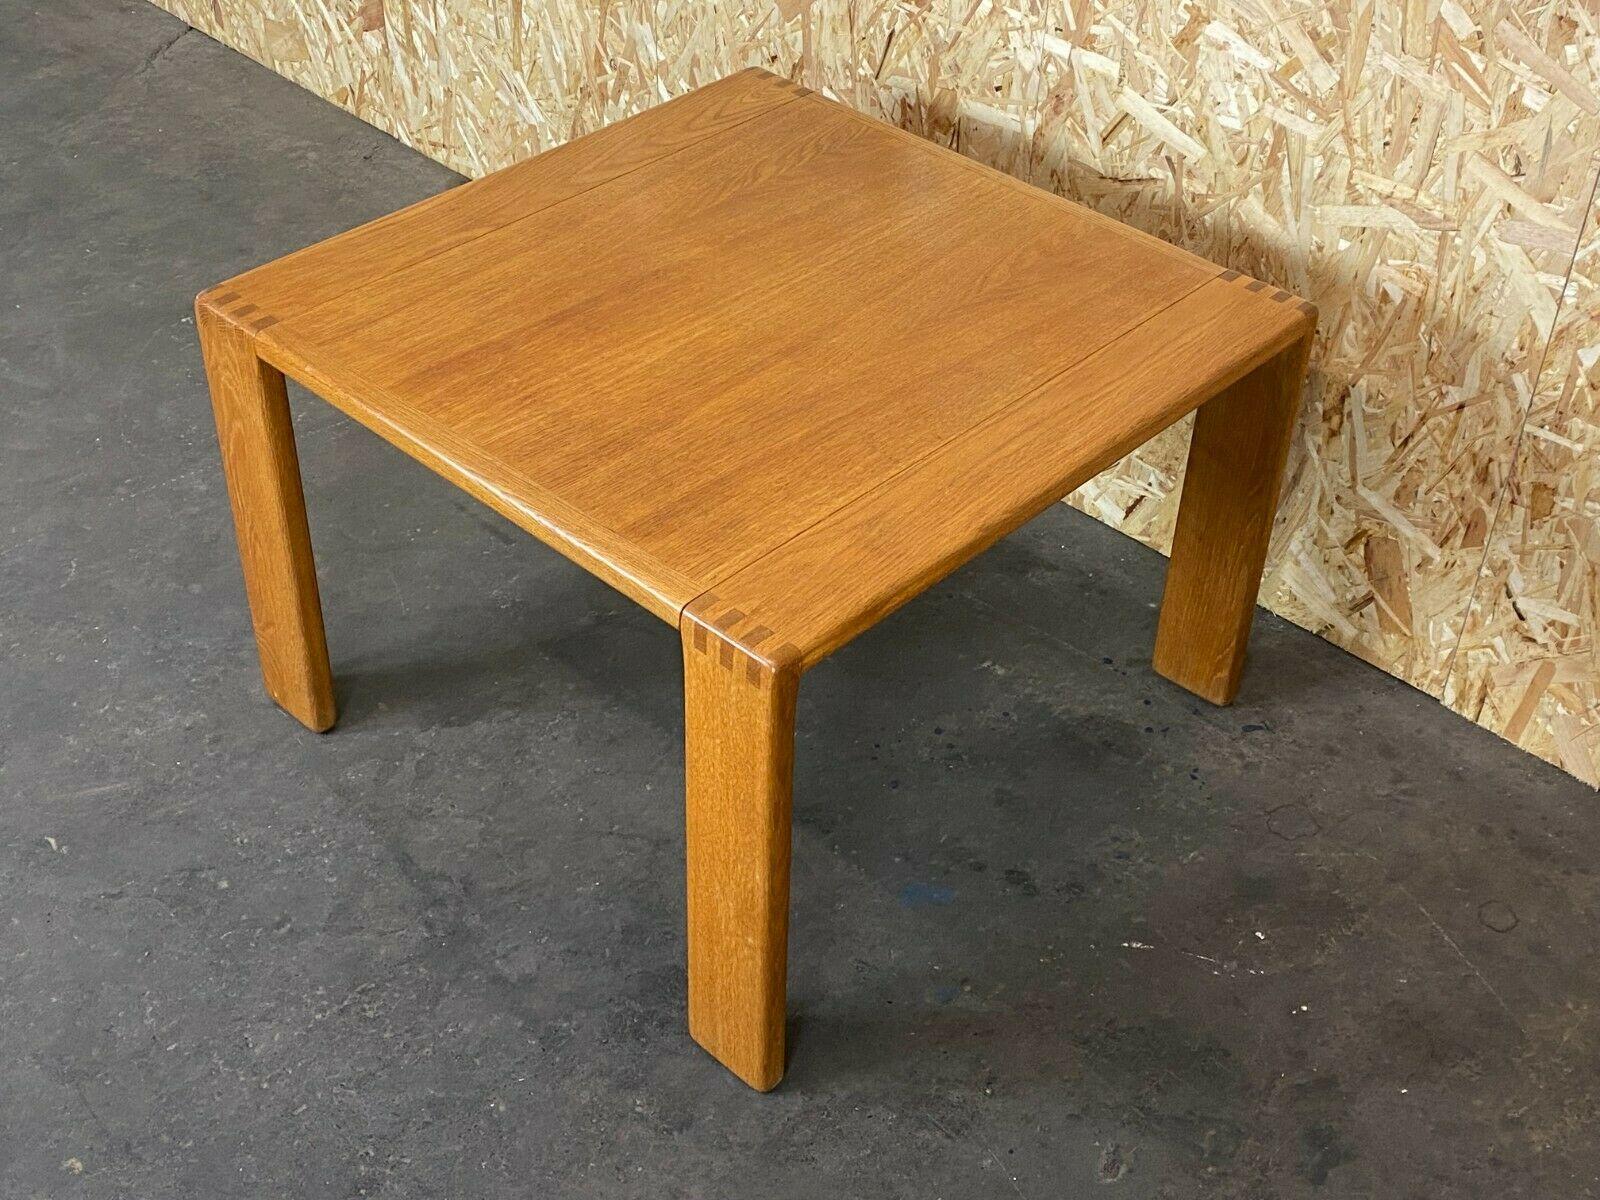 60s 70s Oak Coffee Table Table Esko Pajamies Asko Finland 60s 70s

Object: side table / coffee table

Manufacturer: Asco

Condition: good

Age: around 1960-1970

Dimensions:

75cm x 75cm x 50cm

Other notes:

The pictures serve as